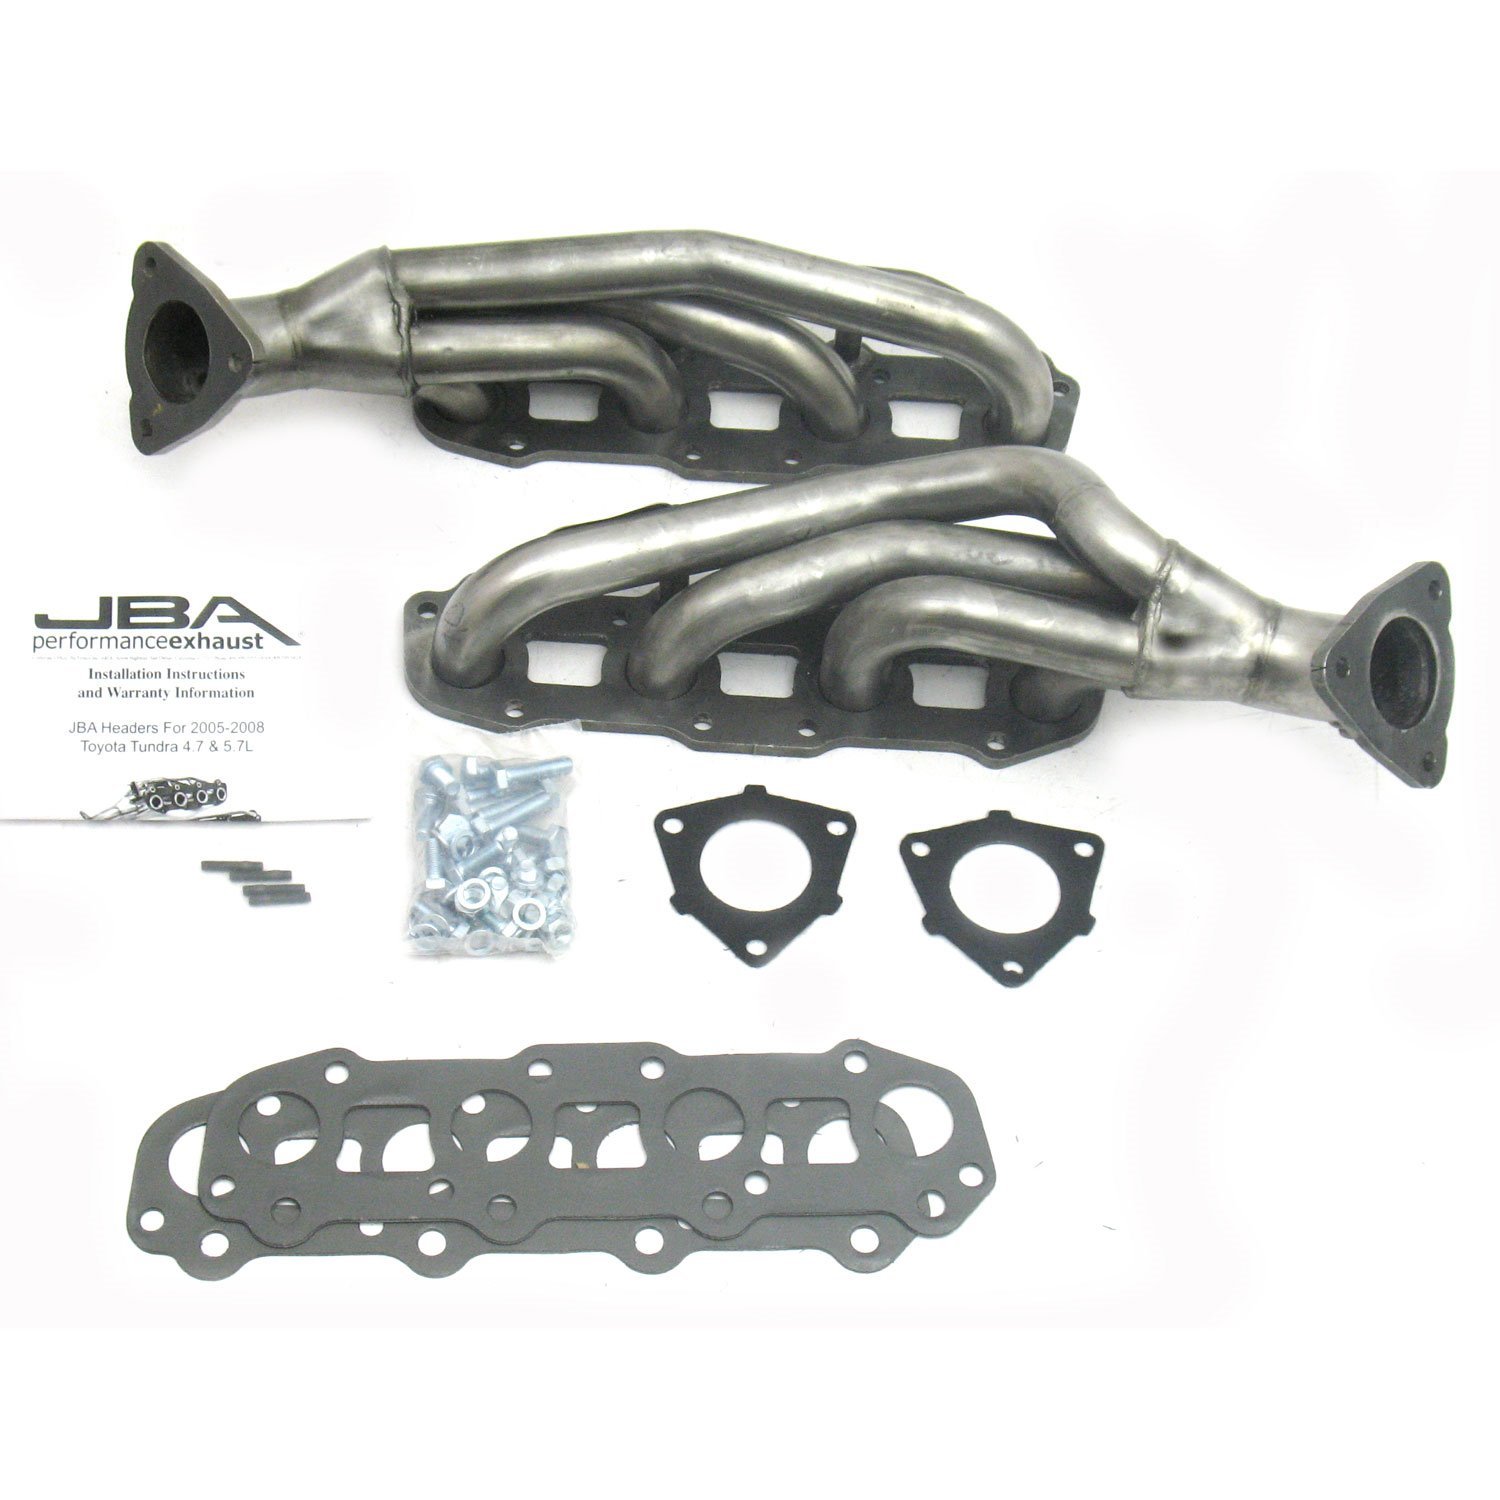 2011S Shorty Headers for 2005-2007 Toyota Tundra, Sequoia w/4.7L, 5.7L V8 Engines